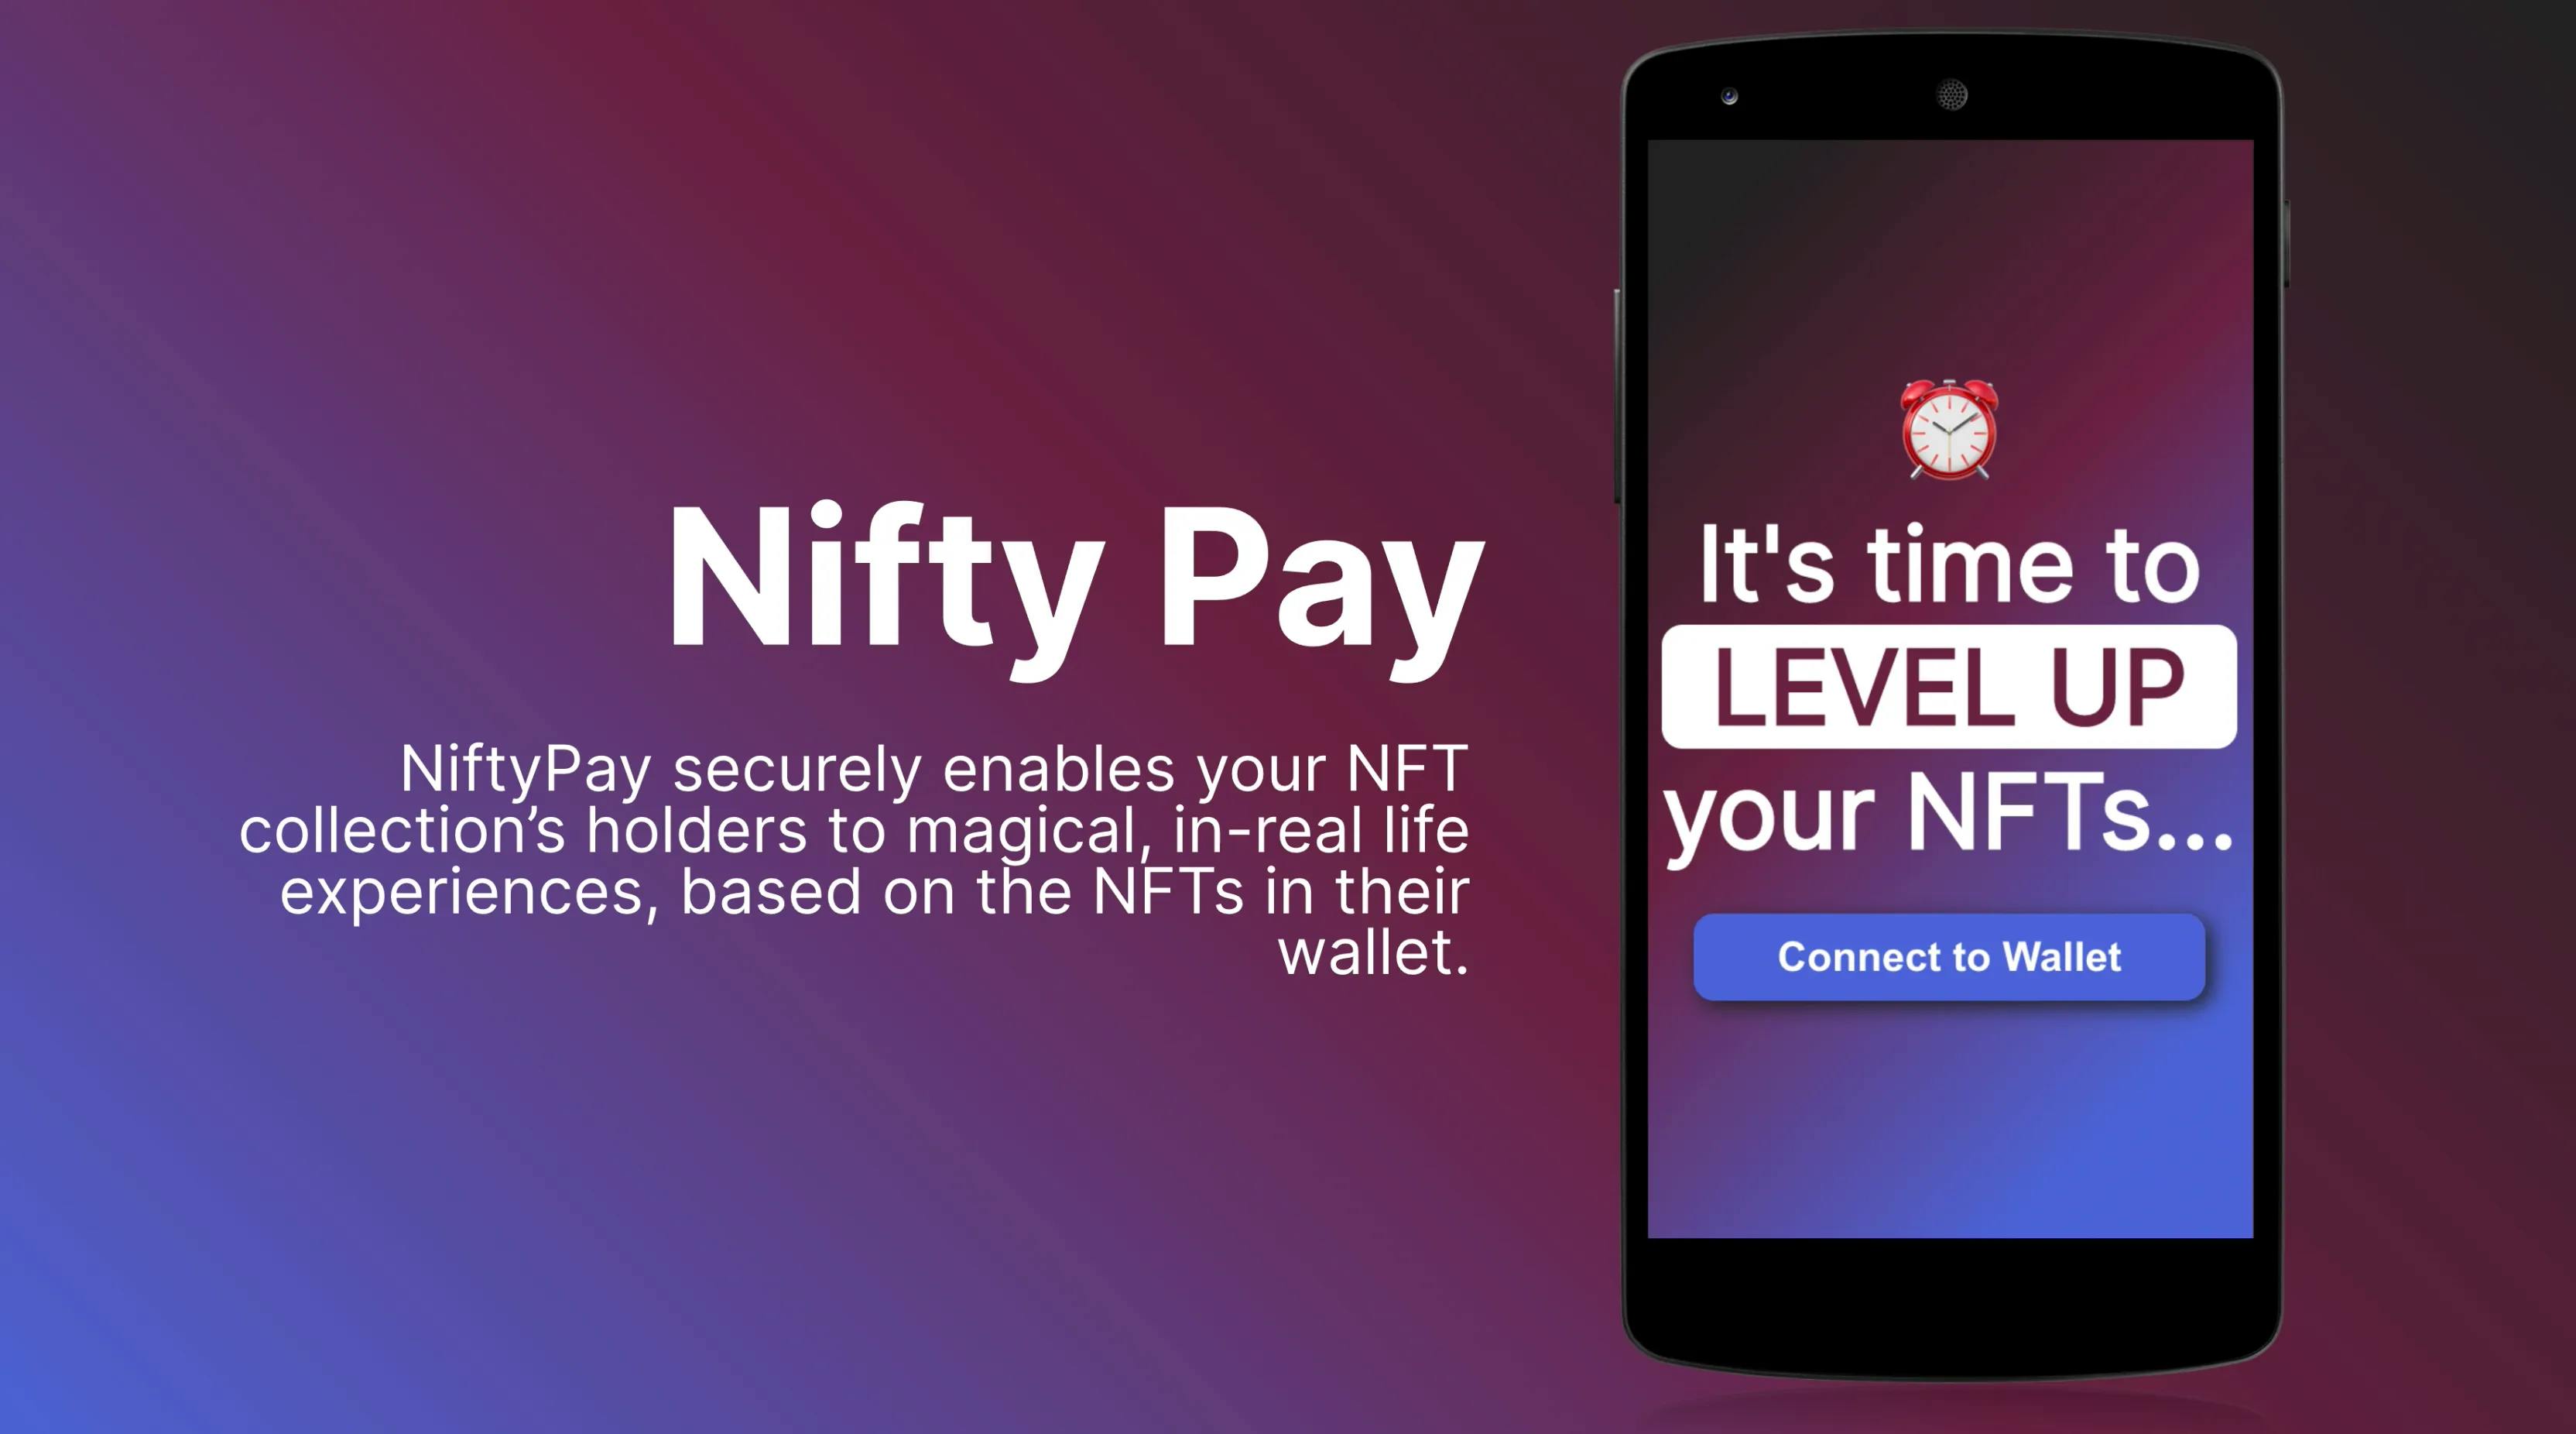 Nifty Pay